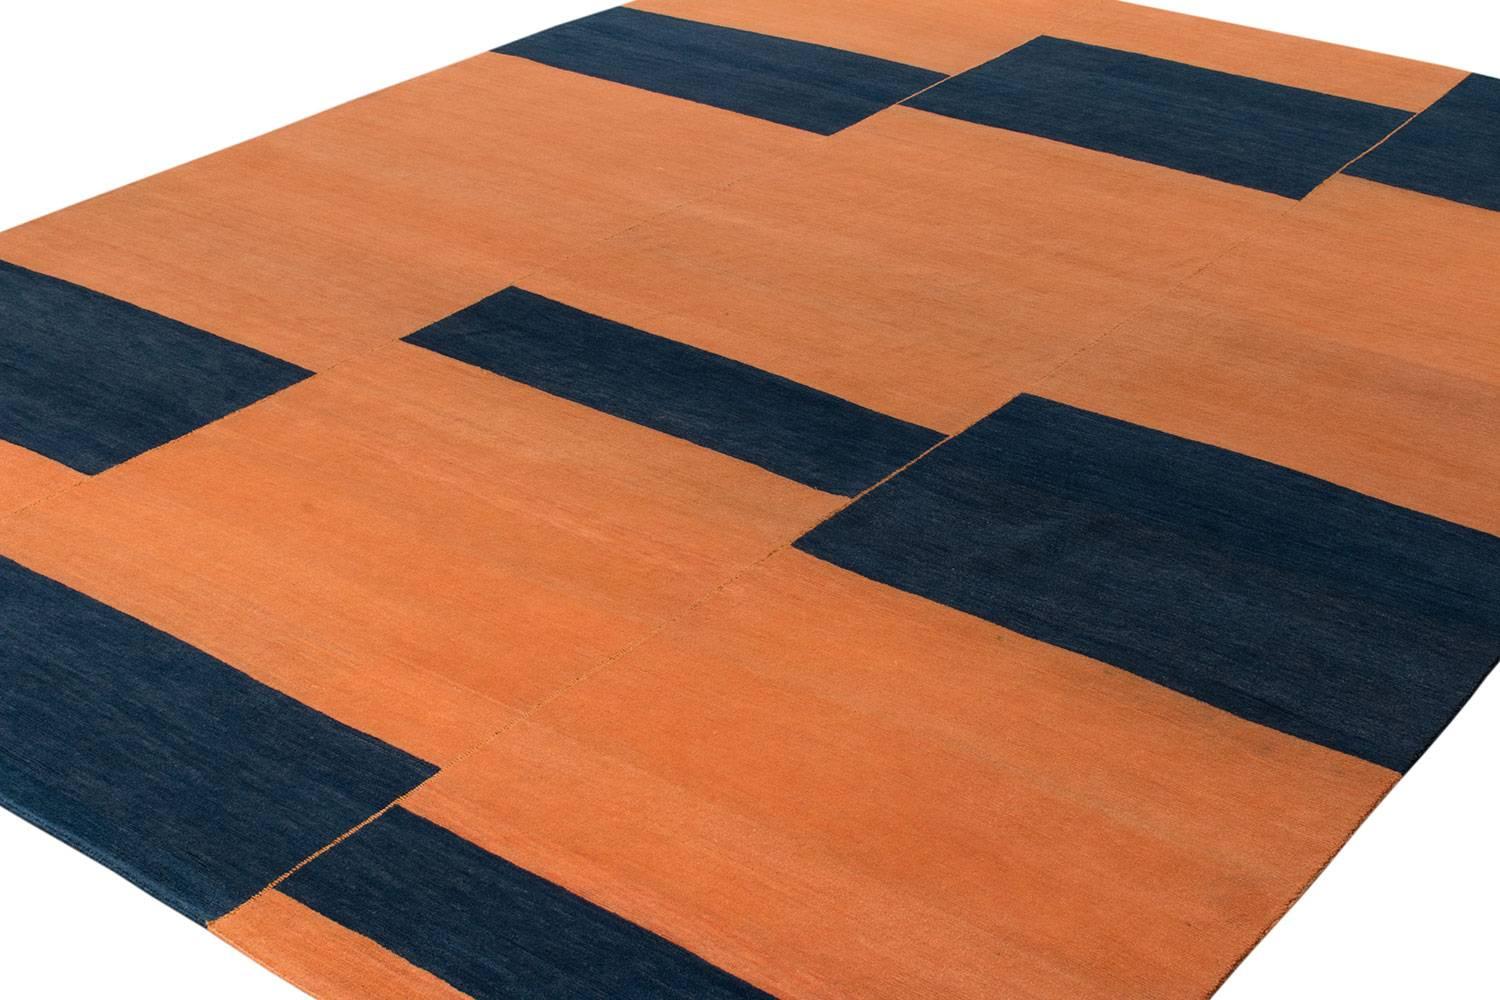 'Terrain' is an original design by Joseph Carini. Handwoven with Tibetan highland wool and hand dyed with all natural indigo. Measures: 9' x 12'.

Joseph Carini is the owner of Joseph Carini Carpets and has been involved in the NYC design scene